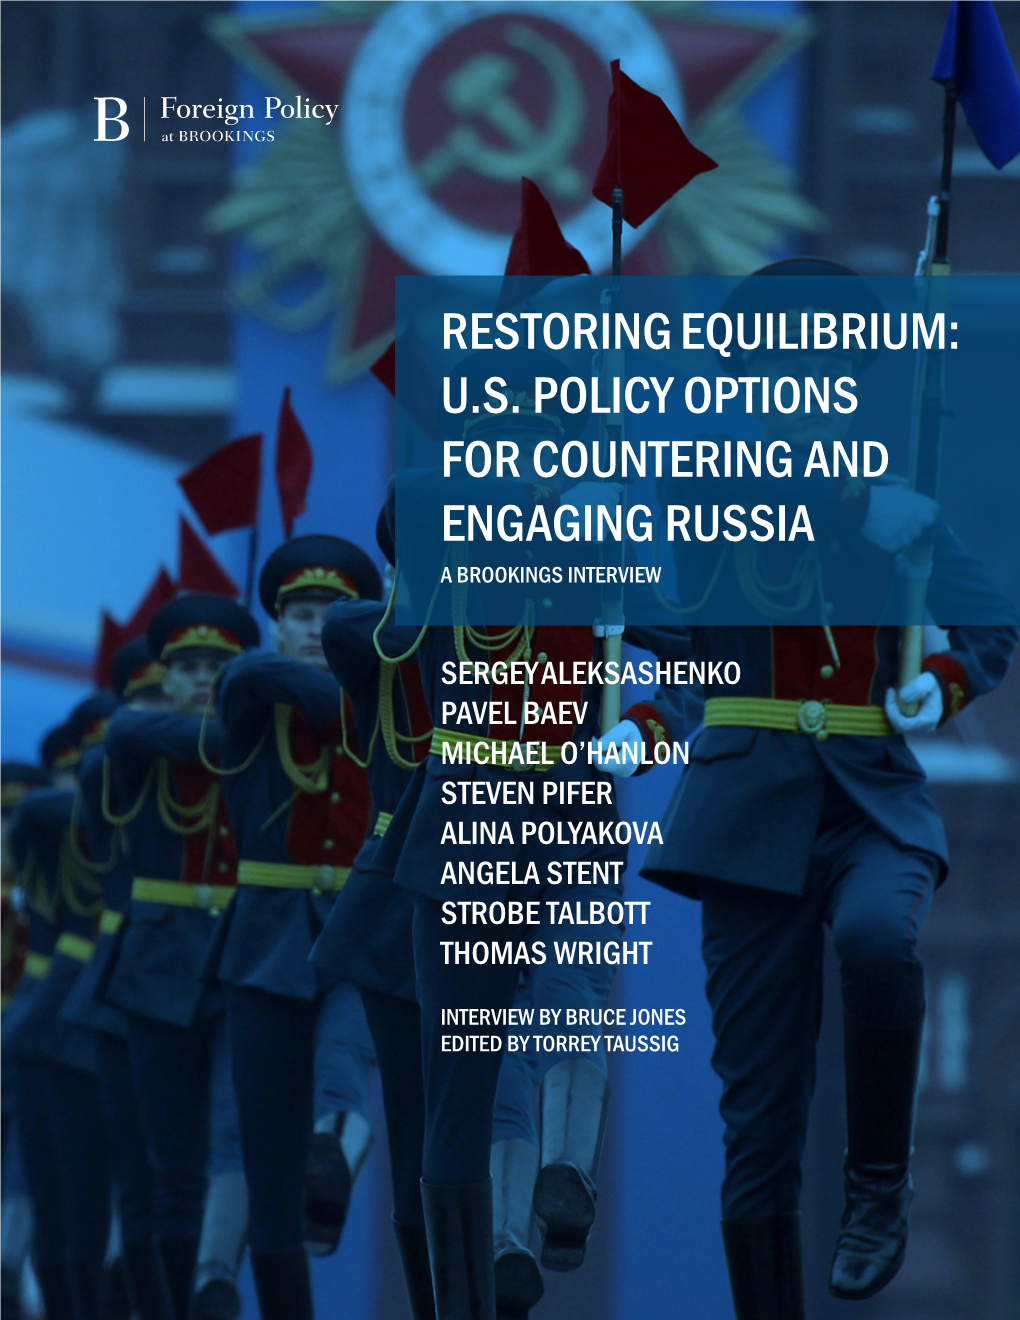 Restoring Equilibrium: U.S. Policy Options for Countering and Engaging Russia a Brookings Interview